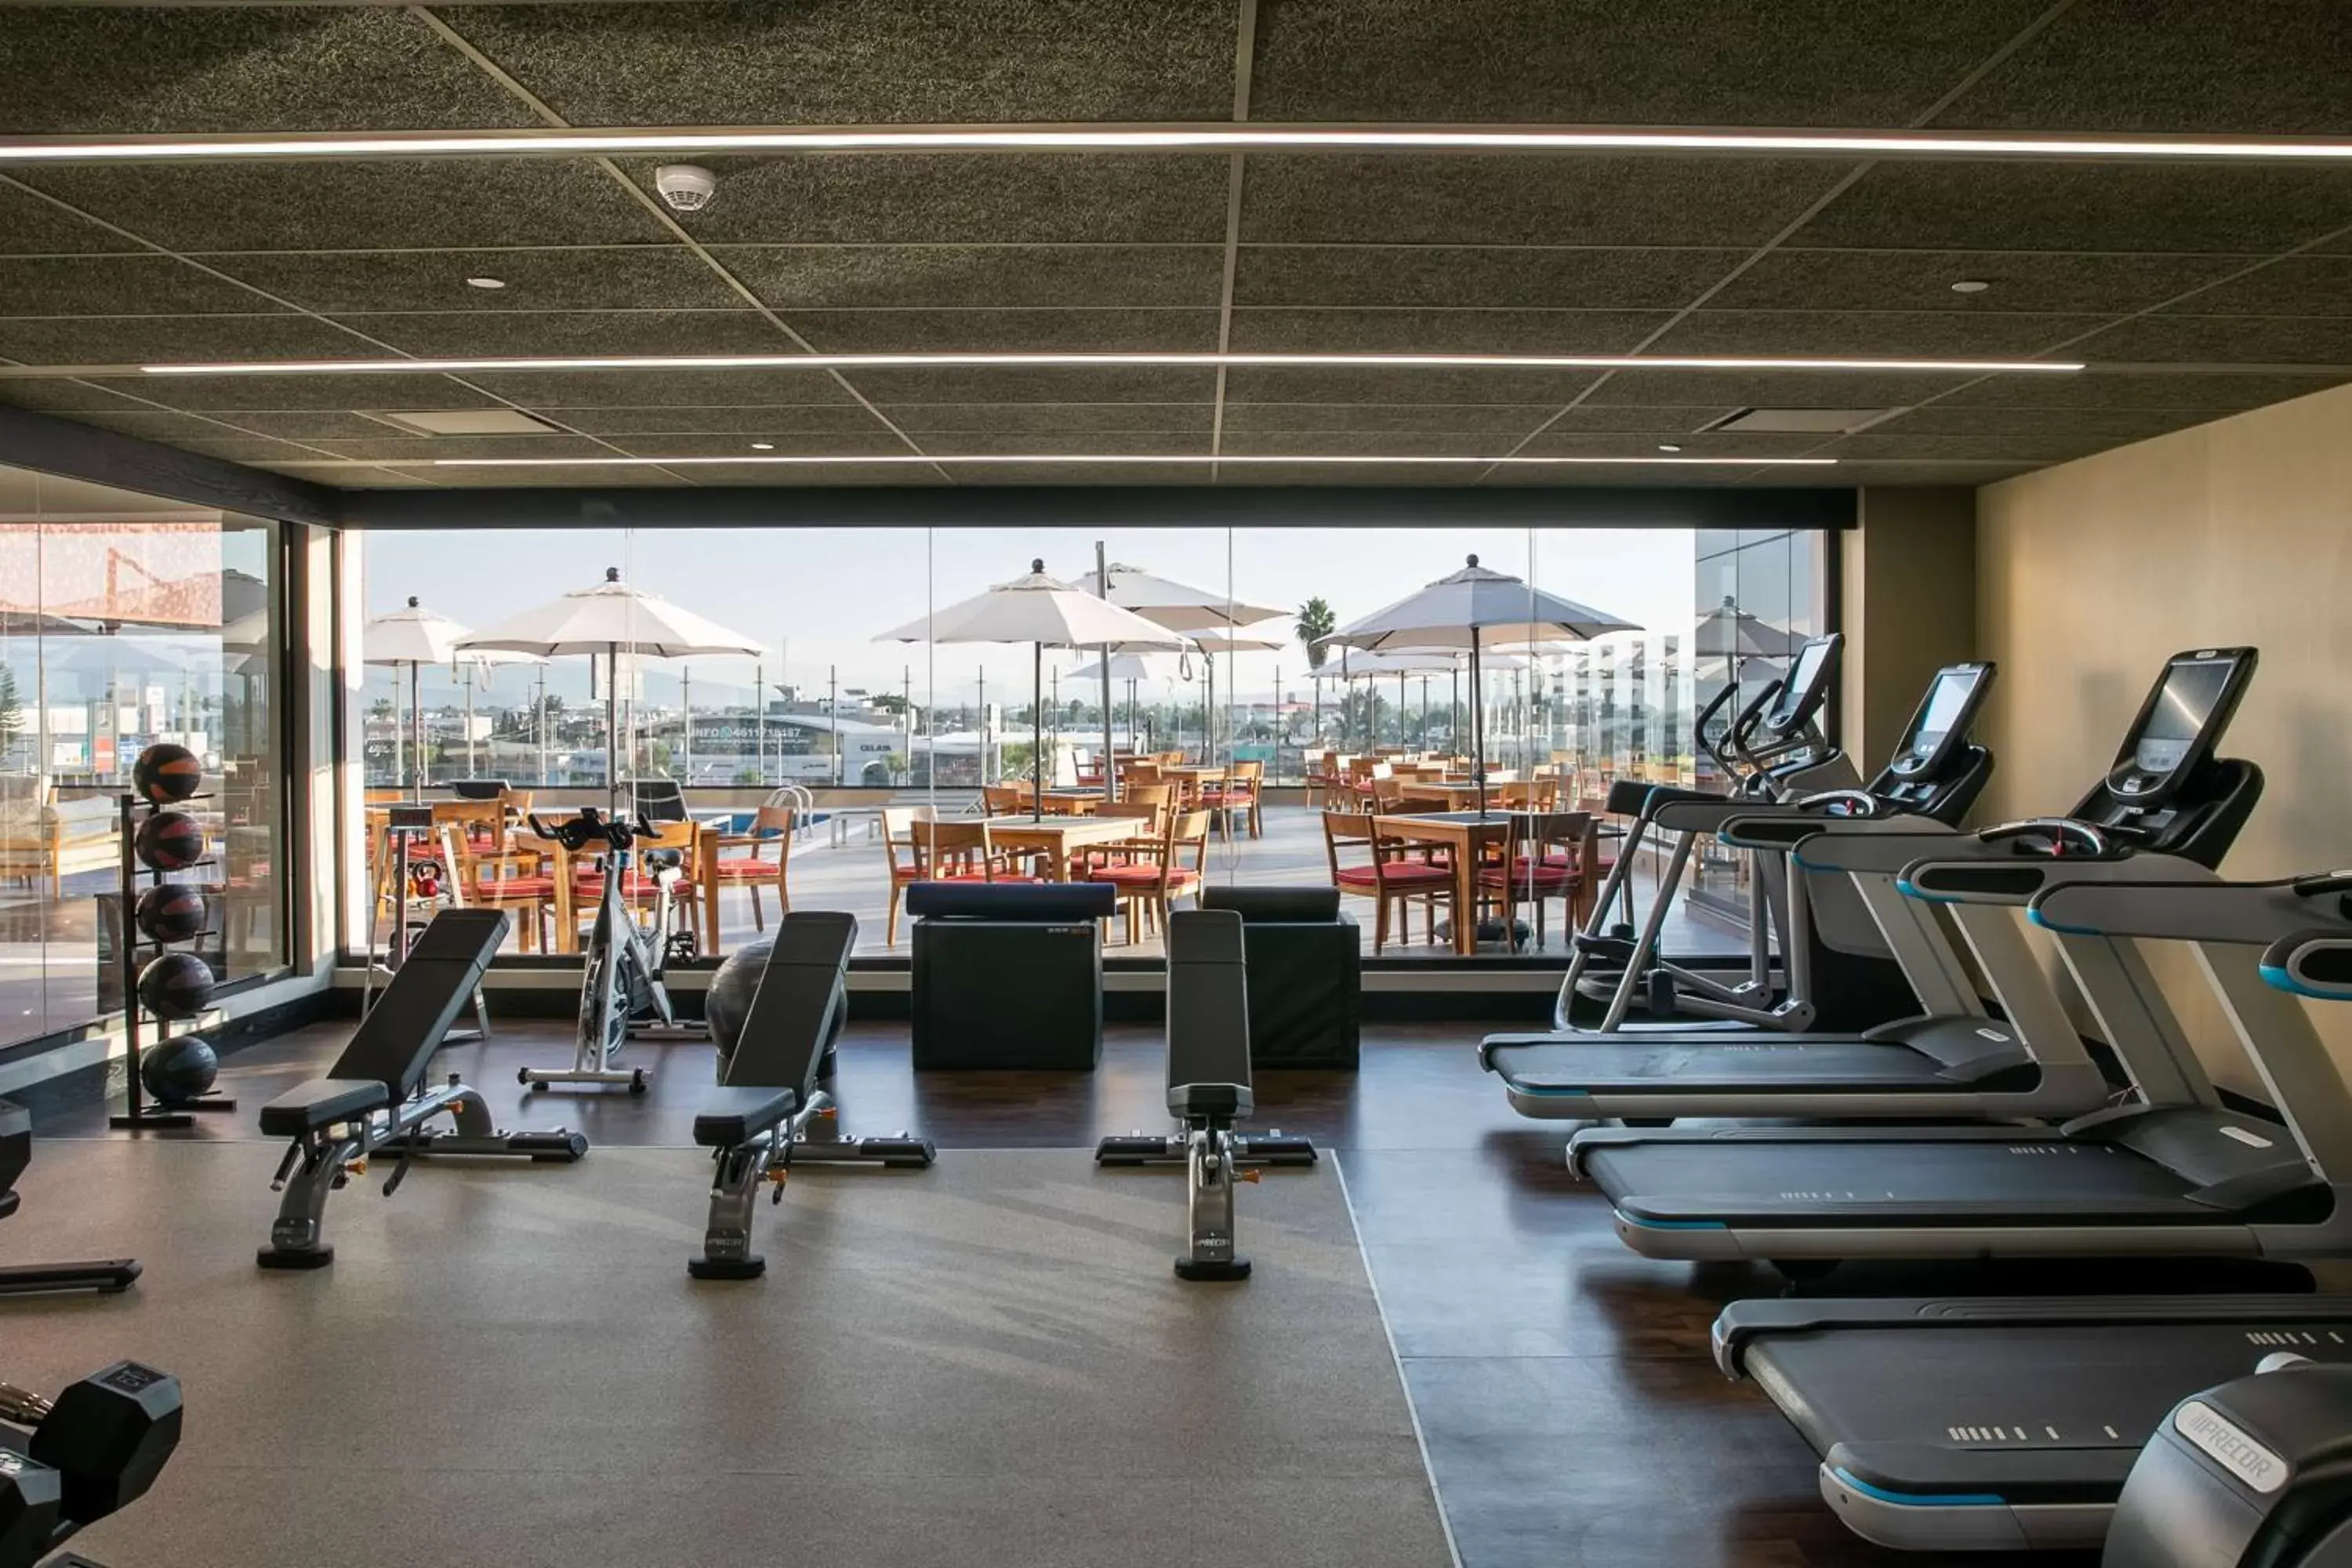 Fitness centre/facilities, Fitness Center/Facilities in Doubletree By Hilton Celaya